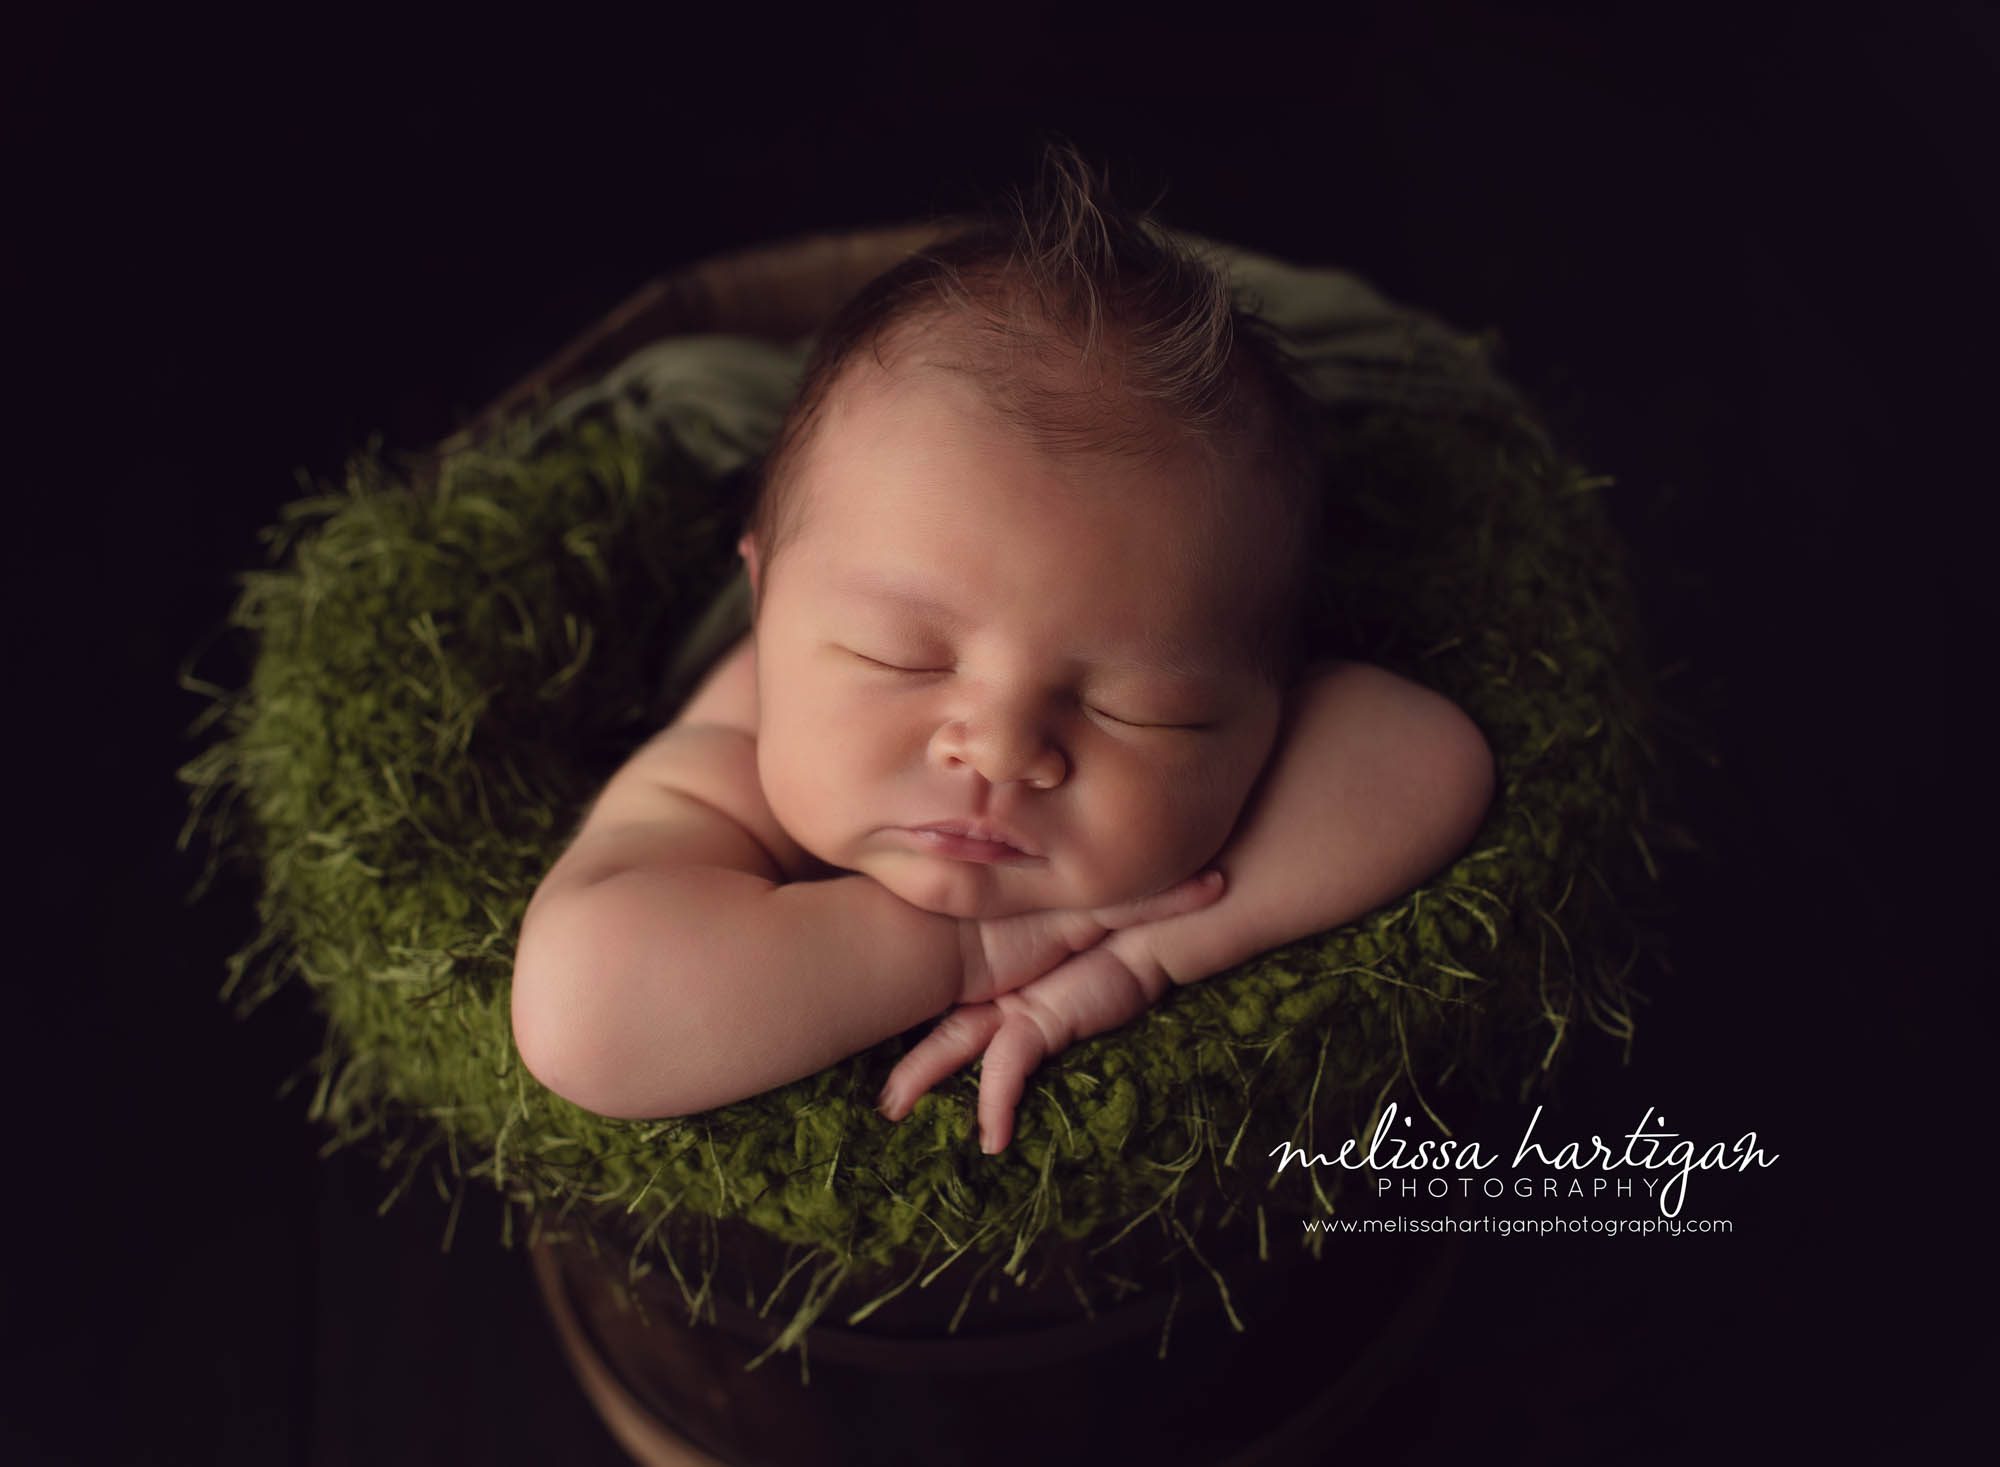 Baby boy posed in bucket with green color moss